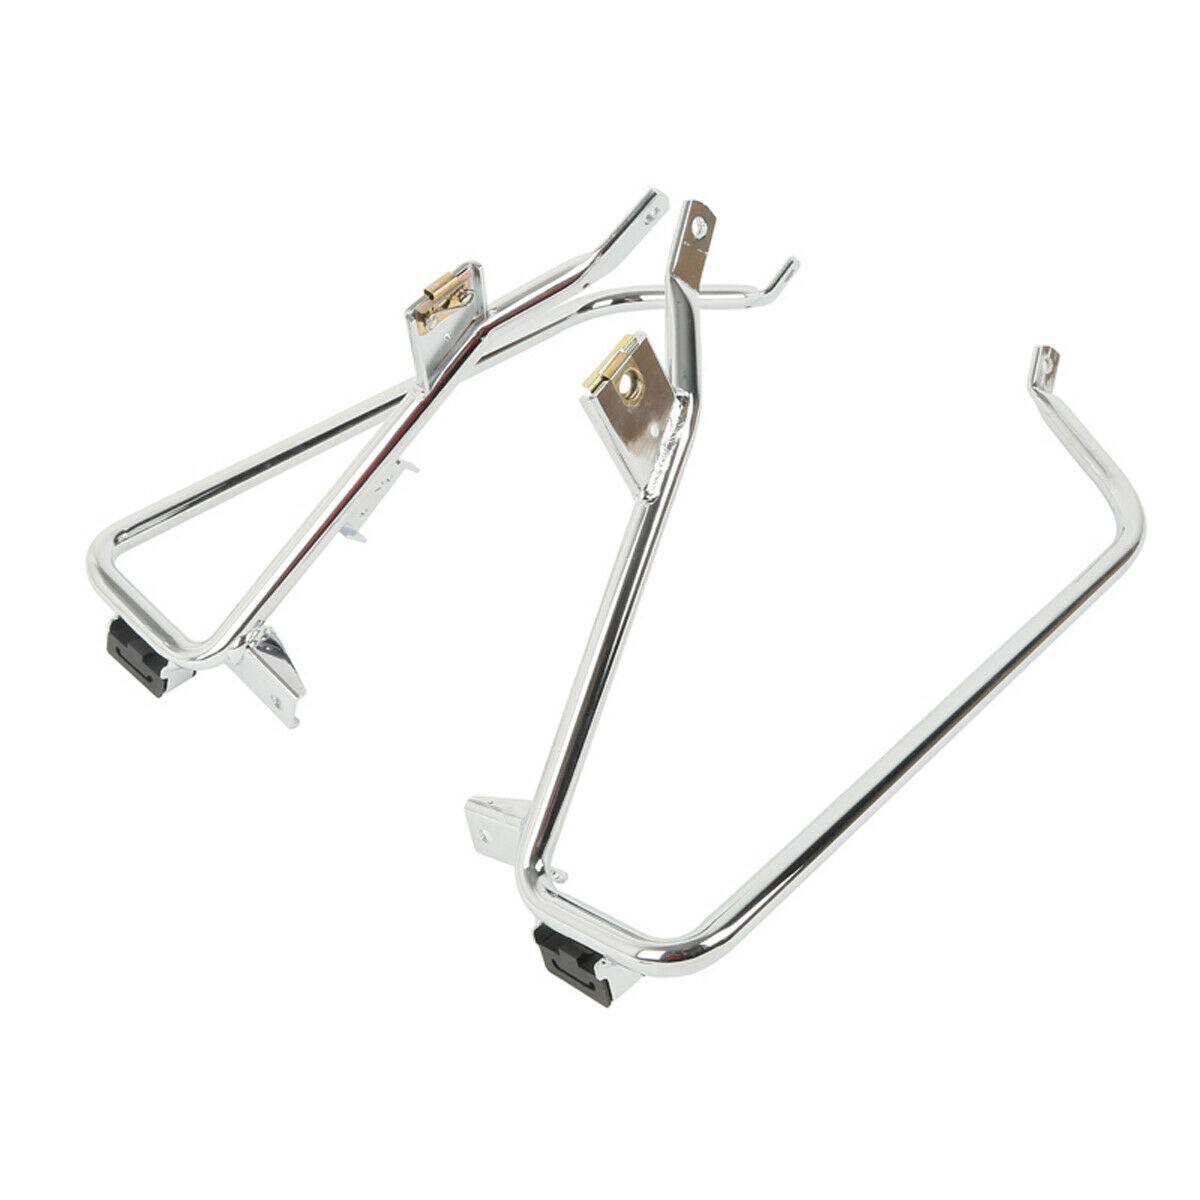 Saddle Bag Support Brackets Fit For Harley Touring Electra Street Glide 2009-13 - Moto Life Products